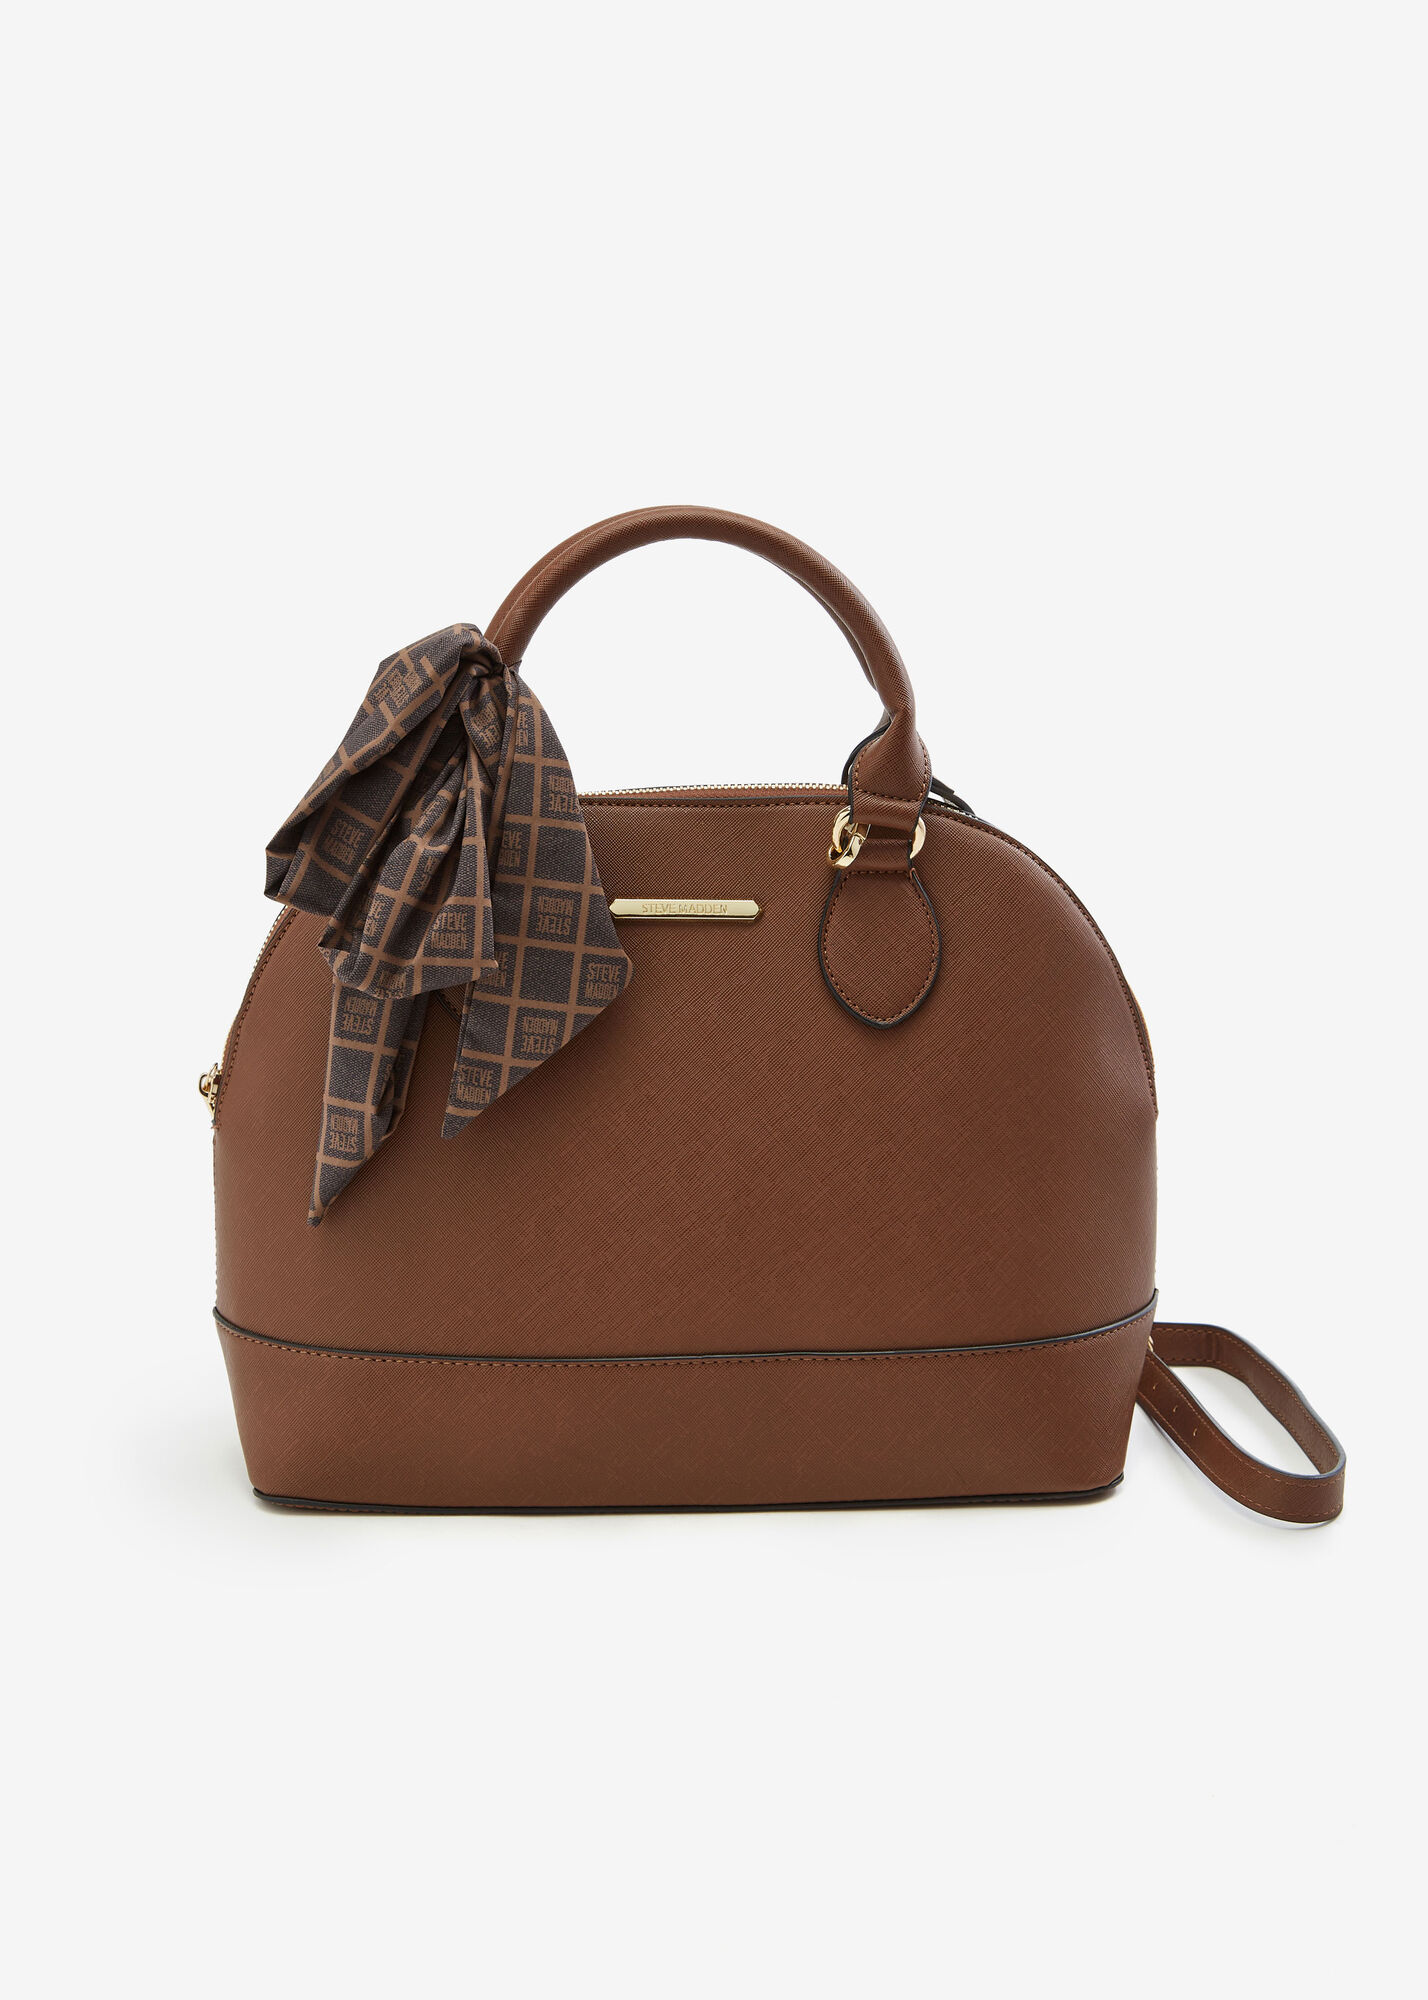 Steve Madden purse, brown with scarf